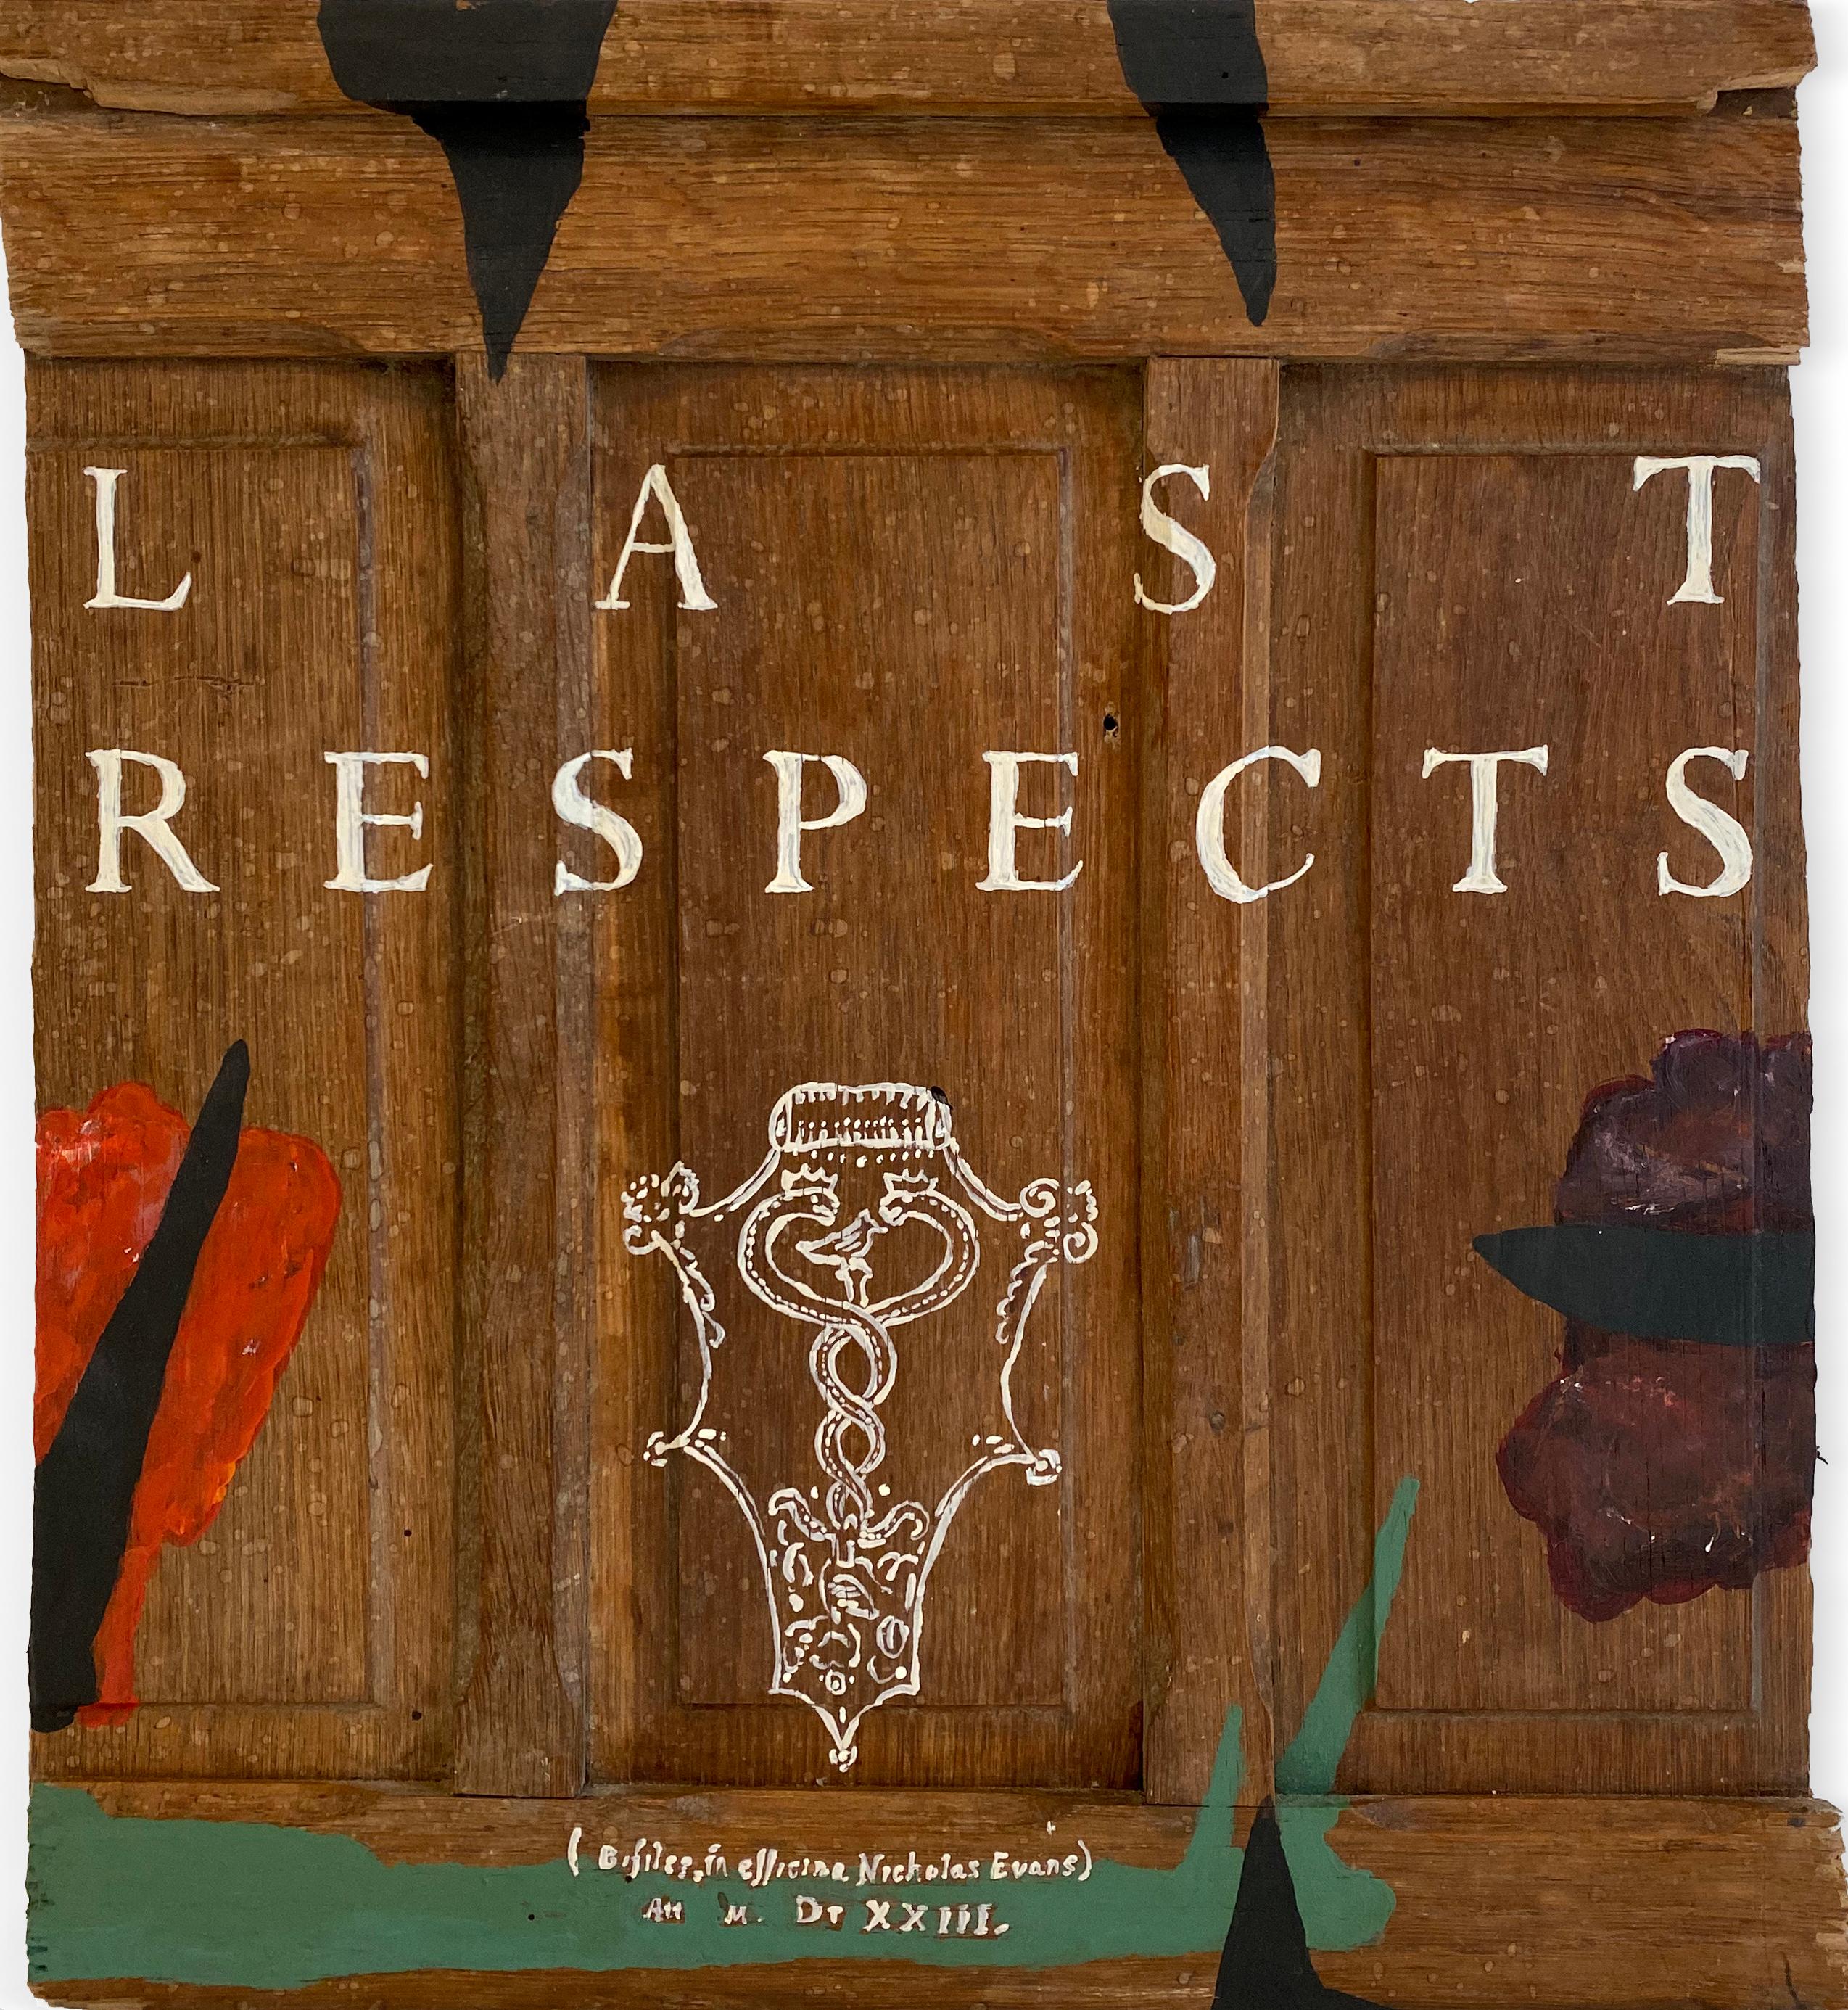 Nicholas Evans Abstract Painting - "Last Respects" (Abstract, Graphic, Text, Type, Sustainable, Antique Wood Door)